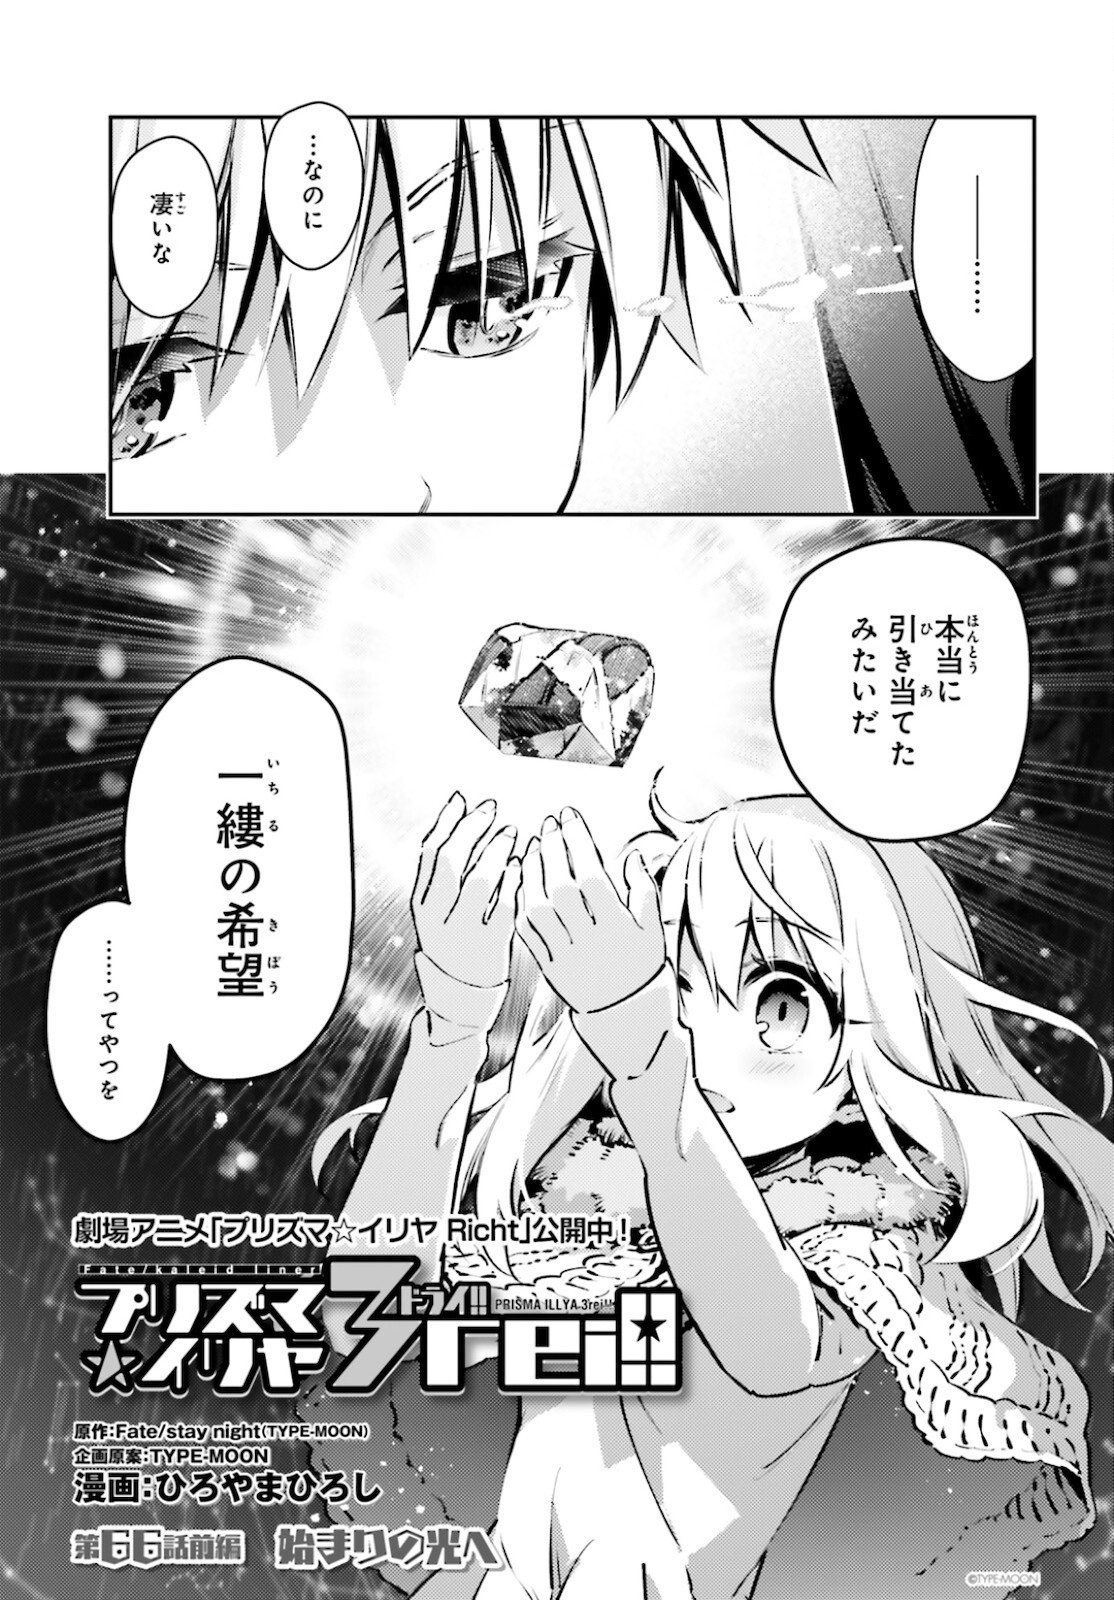 Fate/Kaleid Liner Prisma Illya Drei! - Chapter 66-1 - Page 3